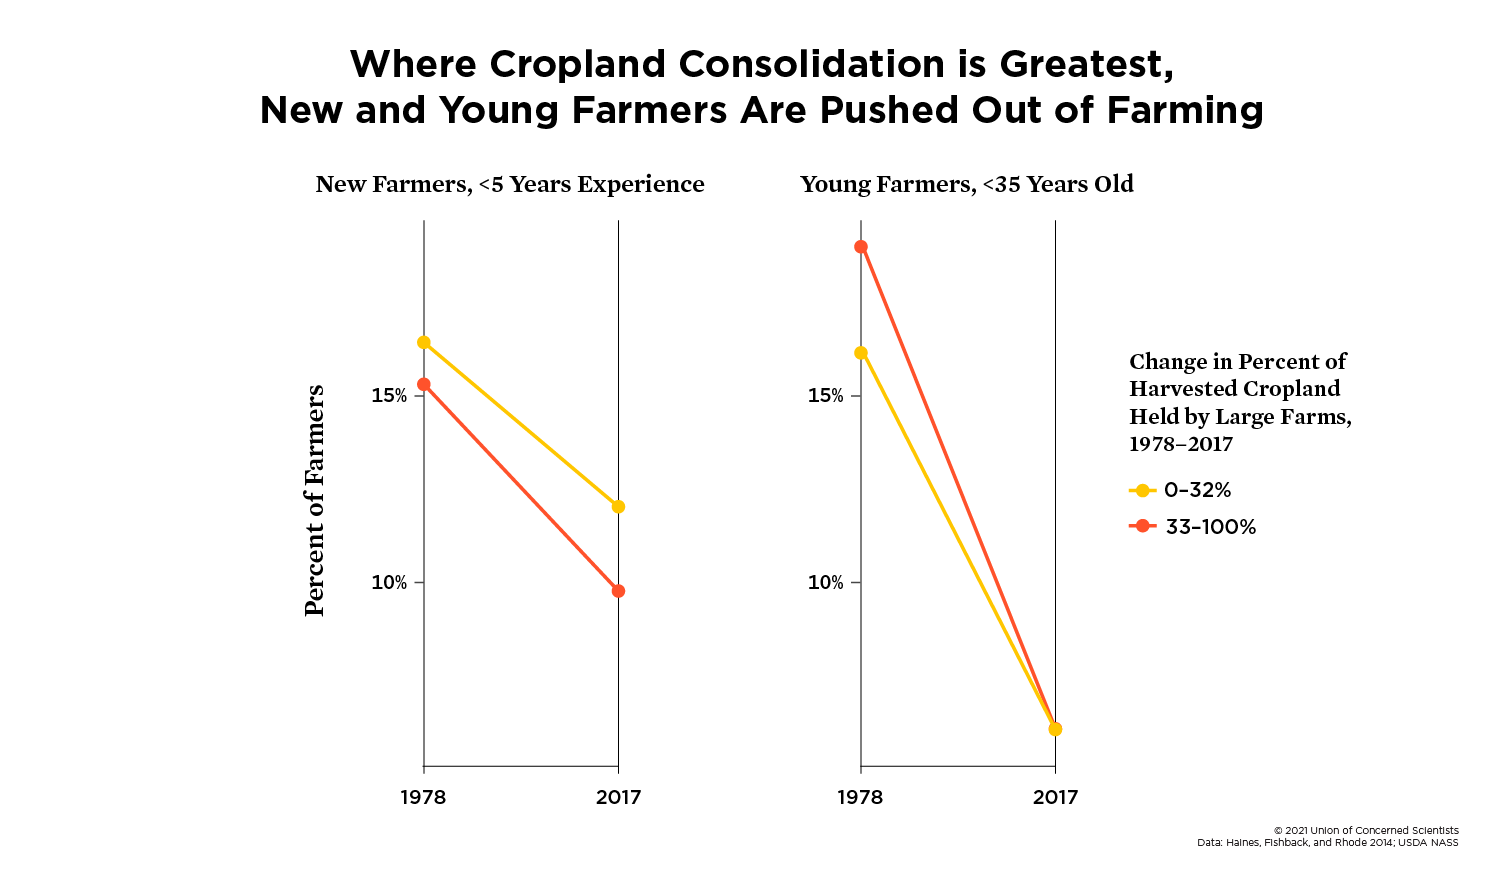 Line graphs showing the association between farmland consolidation and decline in new and young farmers